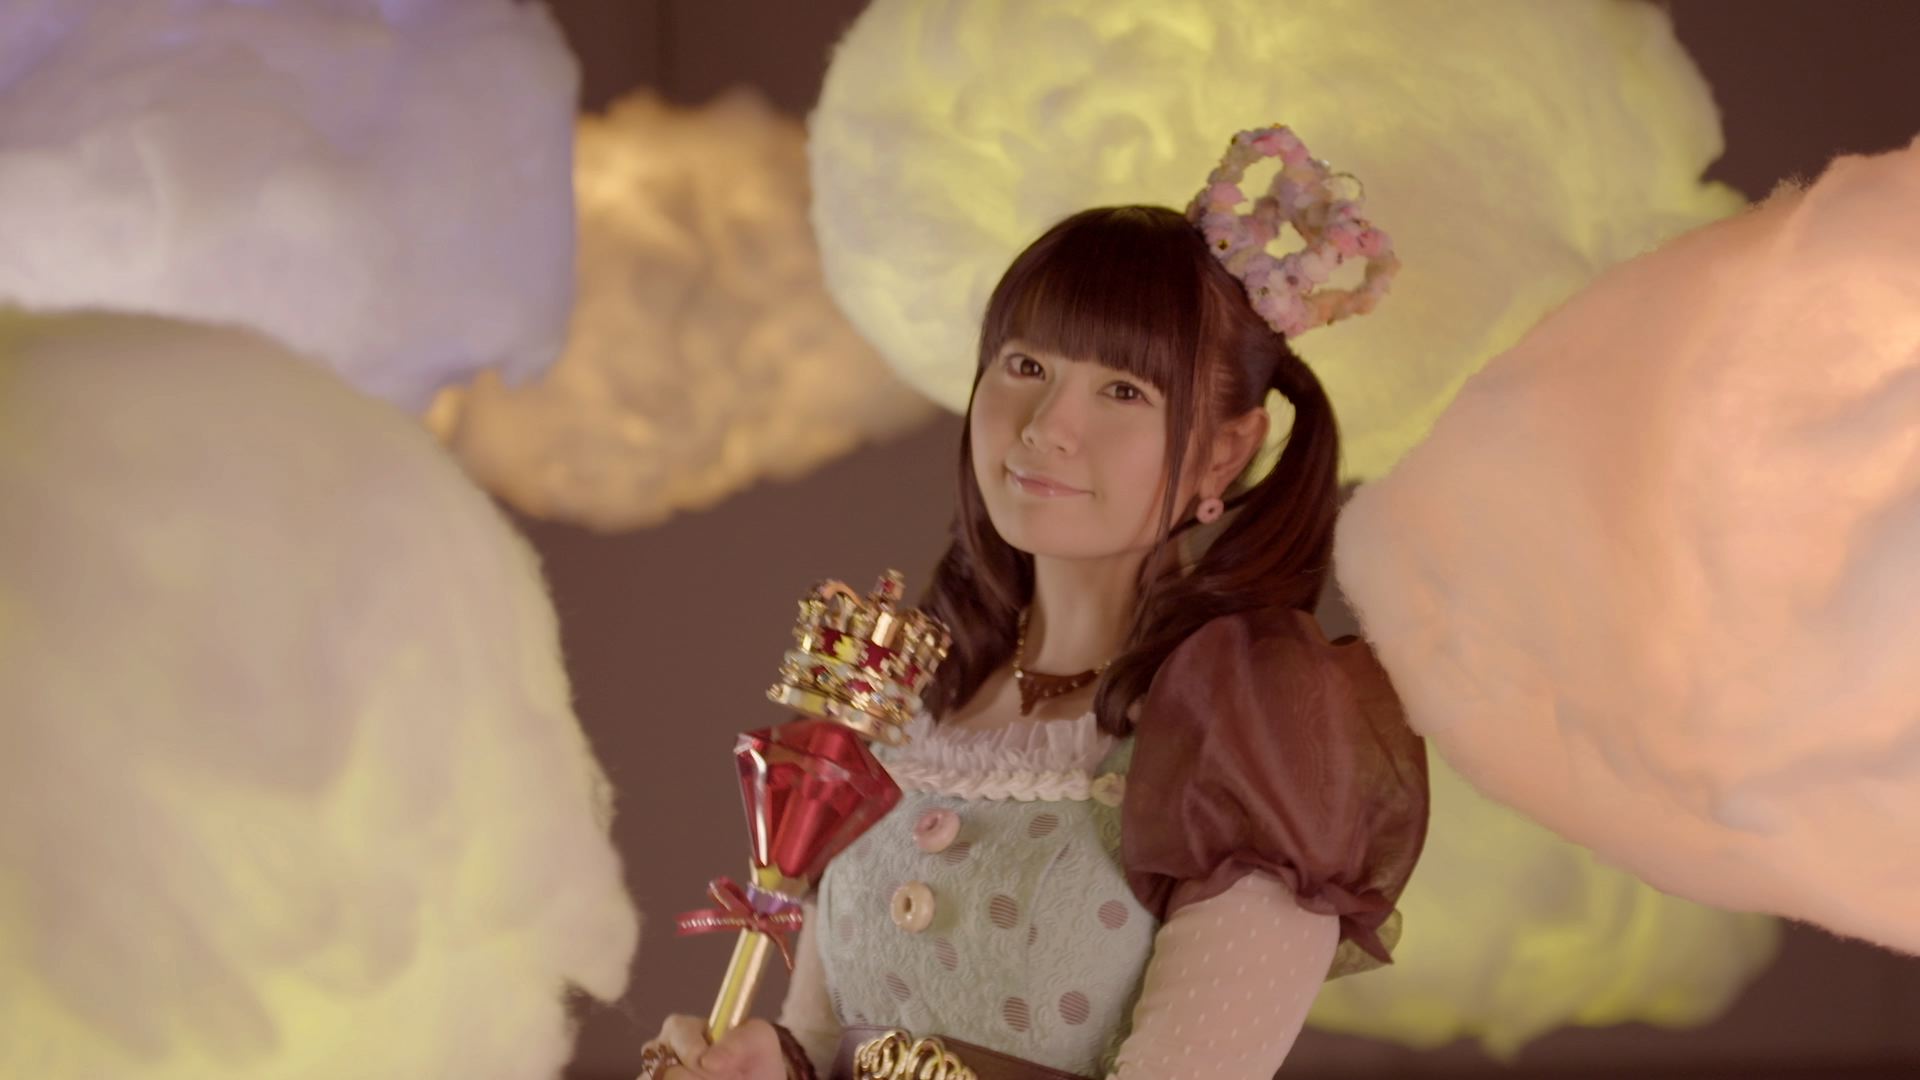 Hey Calorie Queen The 8th Single Of Ayana Taketatsu On Oricon Chart On 28th January Jmag News